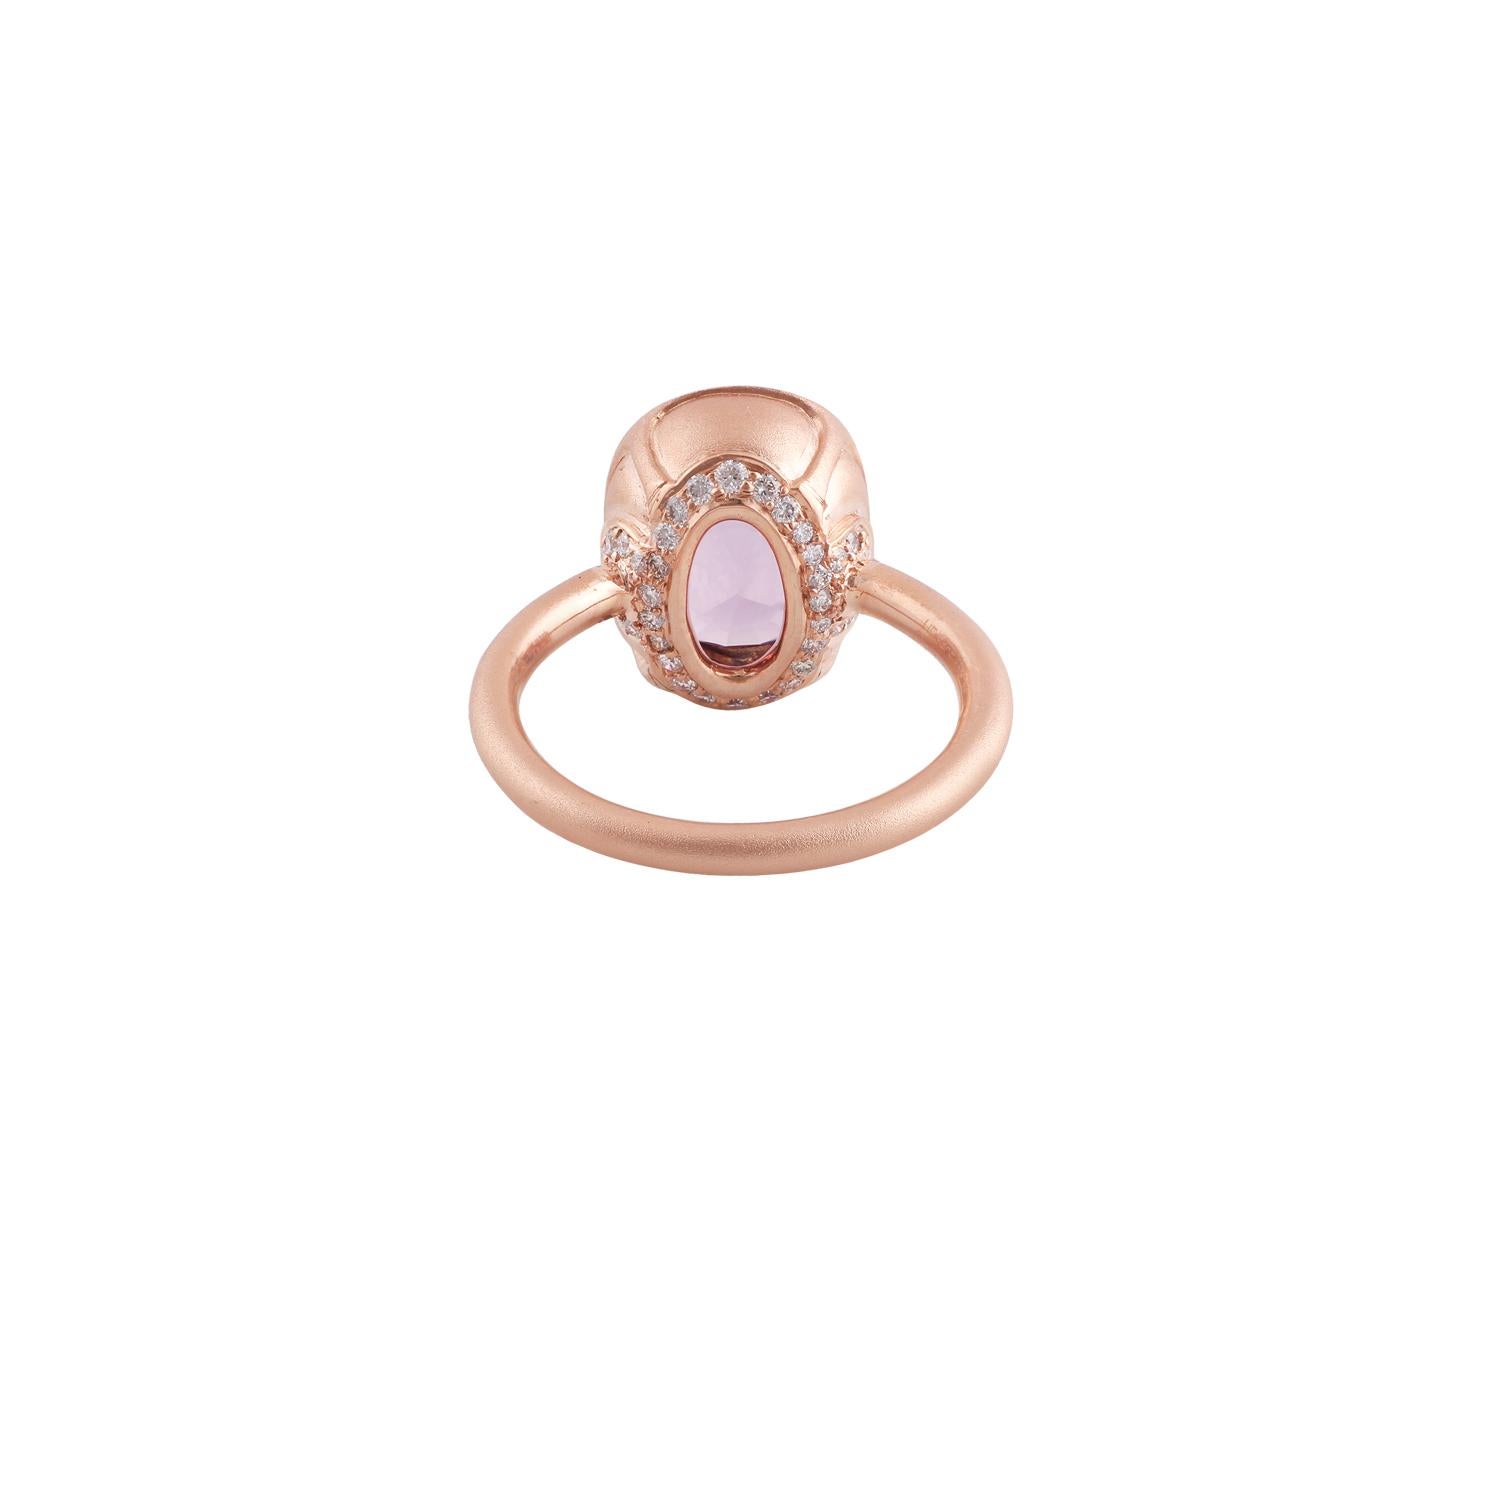 Oval Cut Sri Lanka Natural Spinel & Diamond Surrounded By Matte Finish 18k Rose Gold Ring For Sale